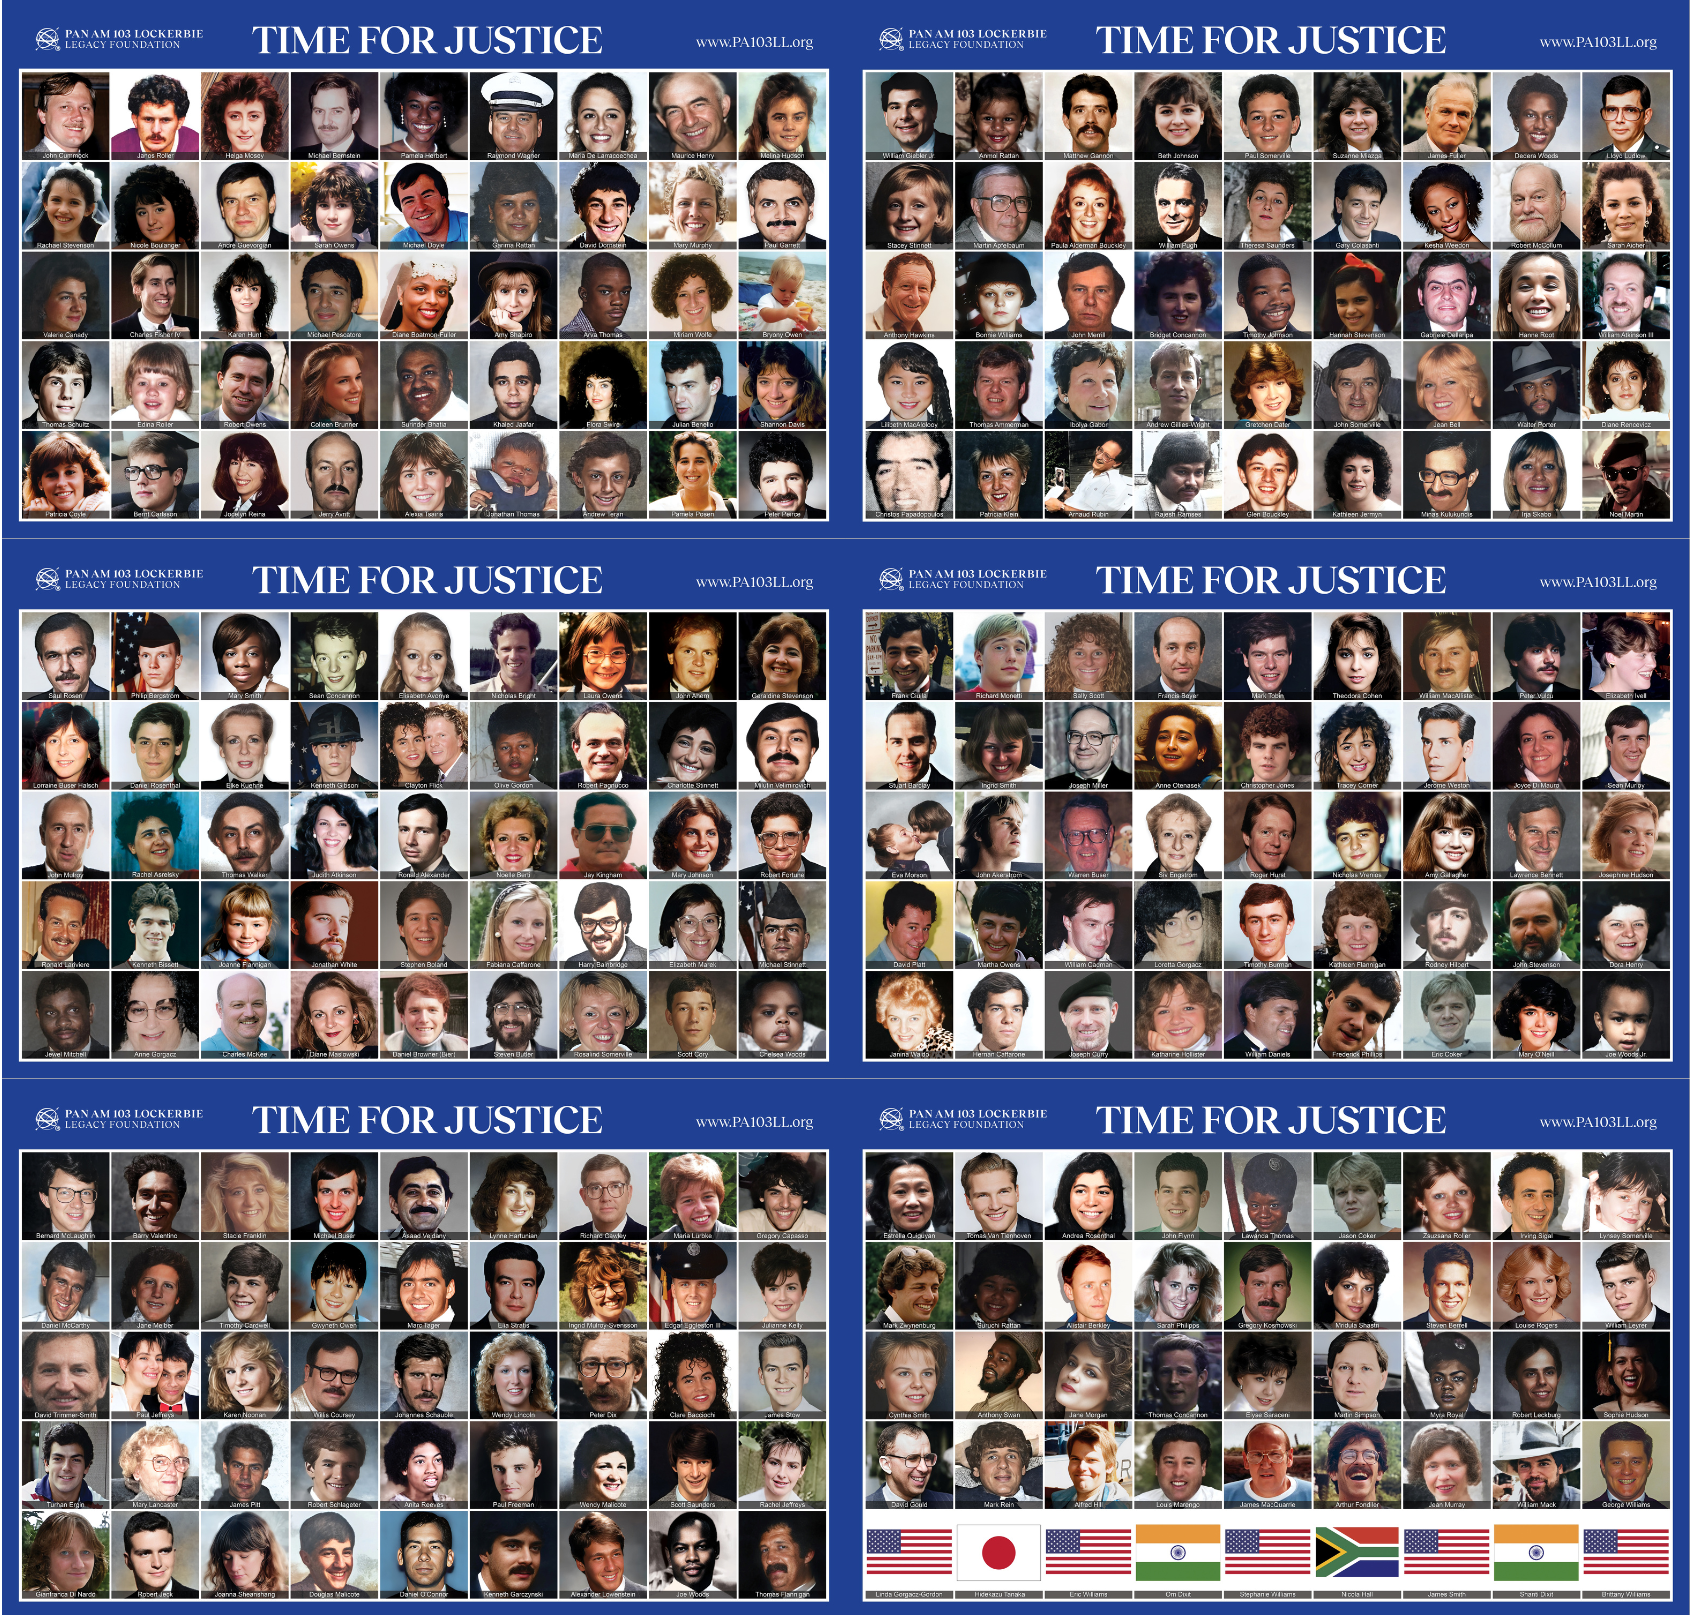 Terror Victims Photo Gallery Revealed to Scottish & U.S. Law Enforcement